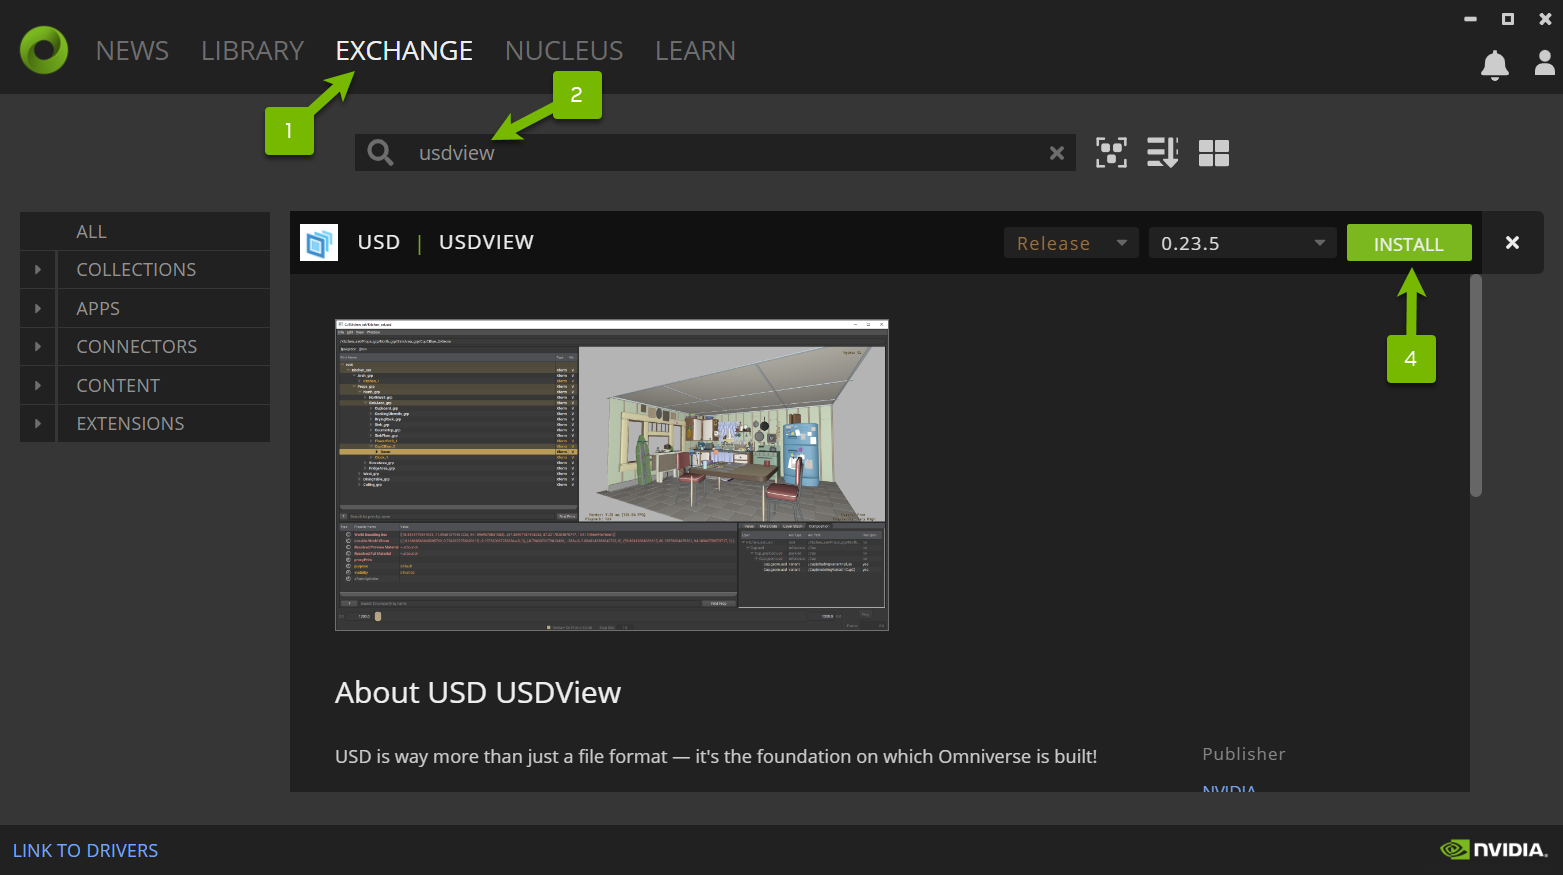 How to install USDView